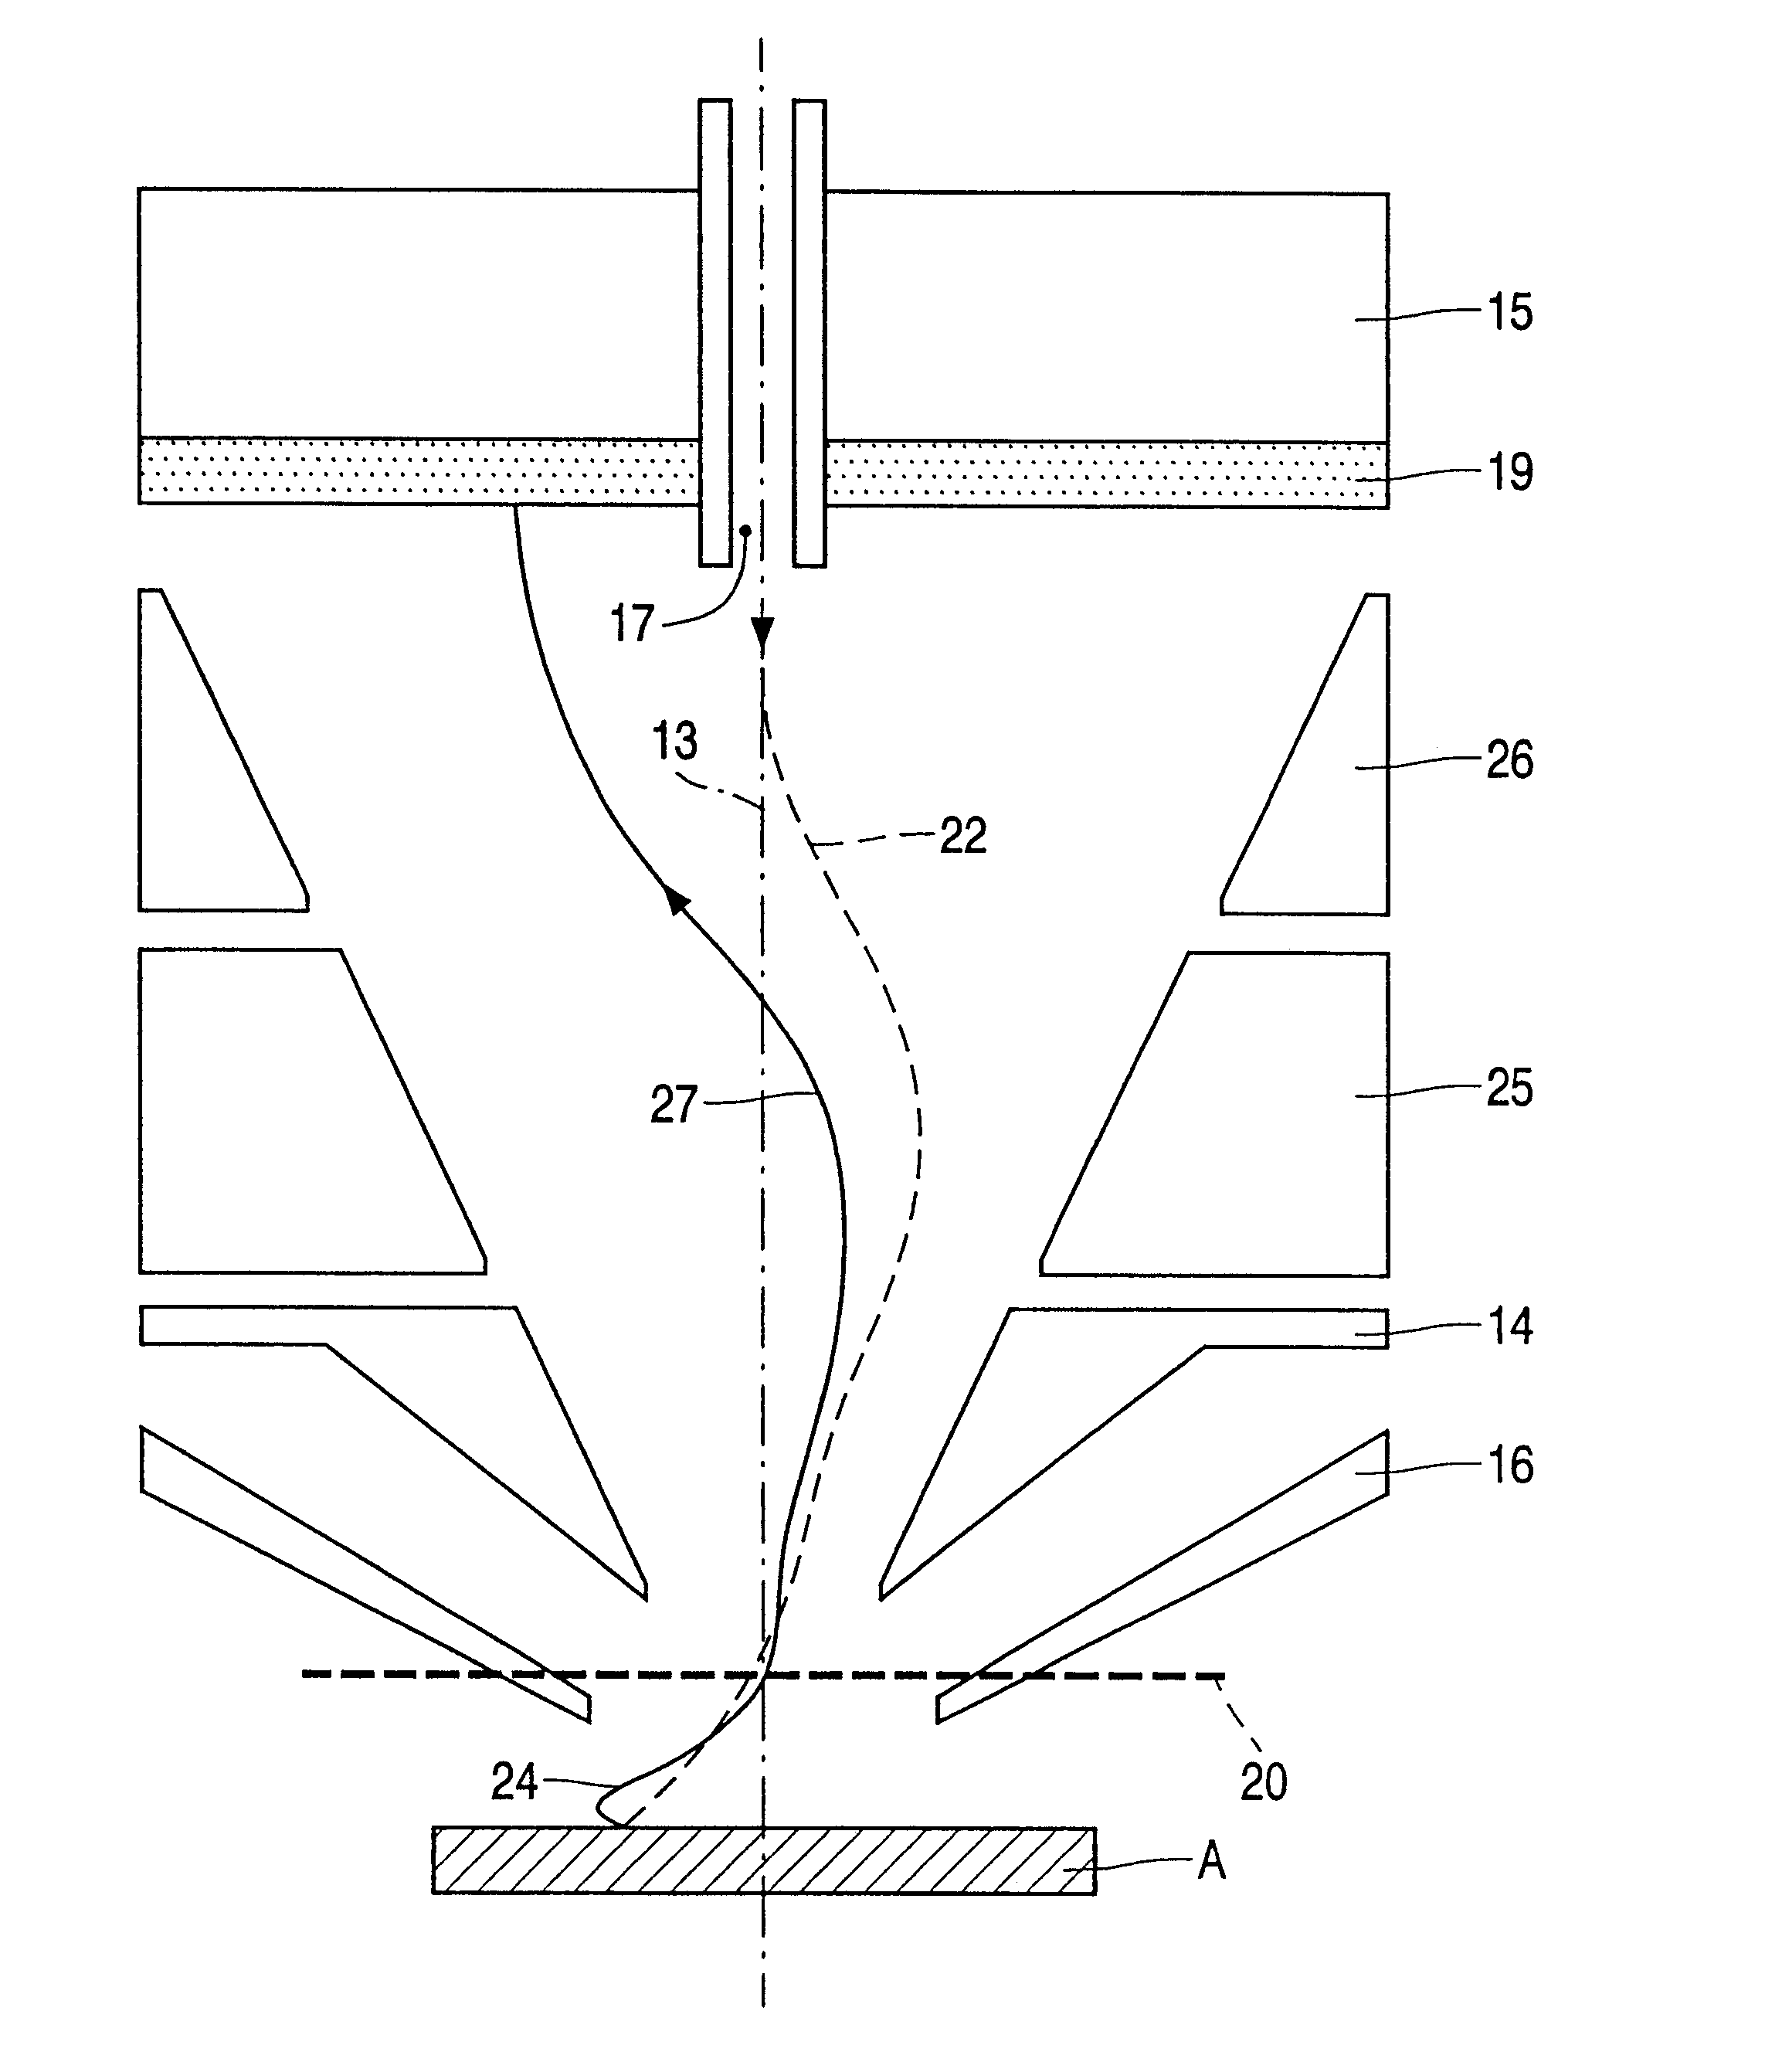 Particle-optical inspection device especially for semiconductor wafers